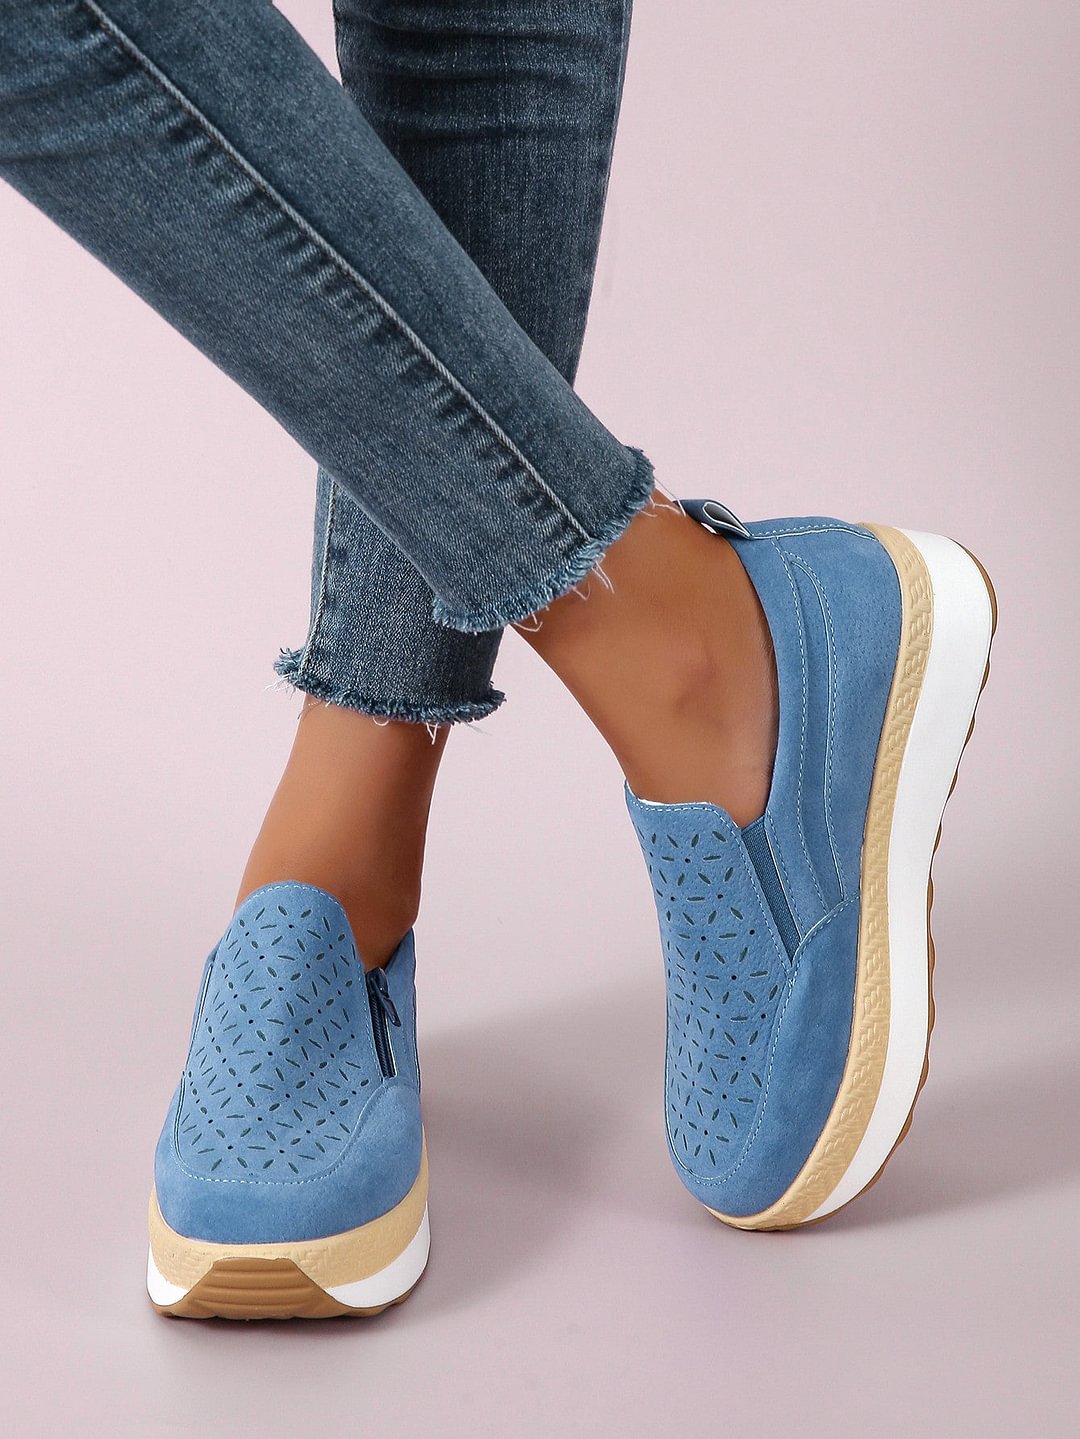 Women's Daily Leisure Home Work Plain Color Comfortable Casual Shoes